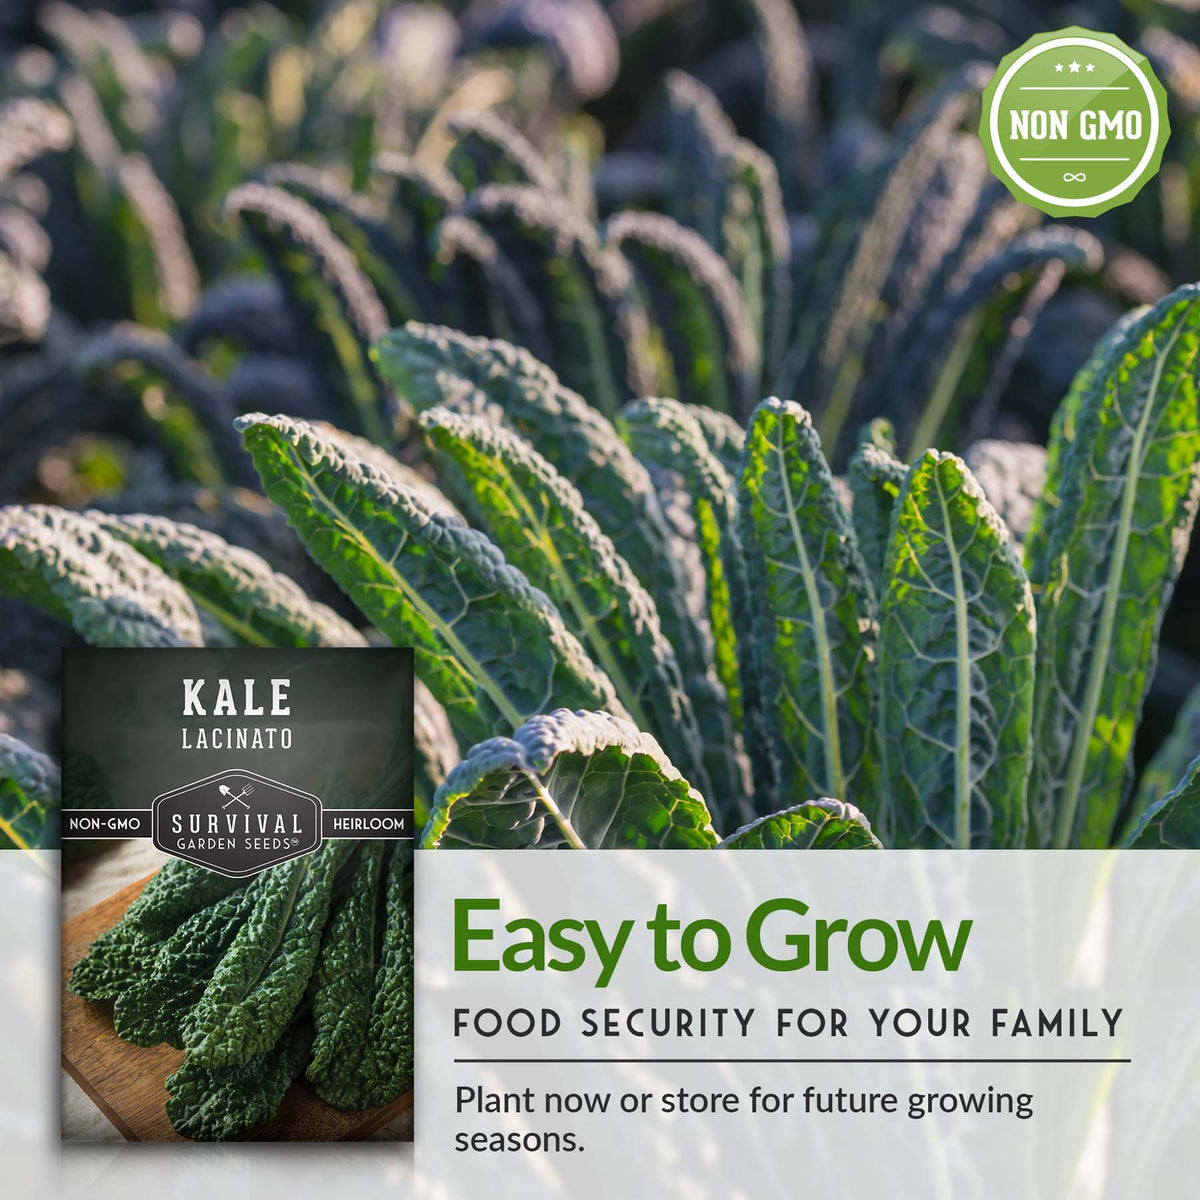 Kale is easy to grow